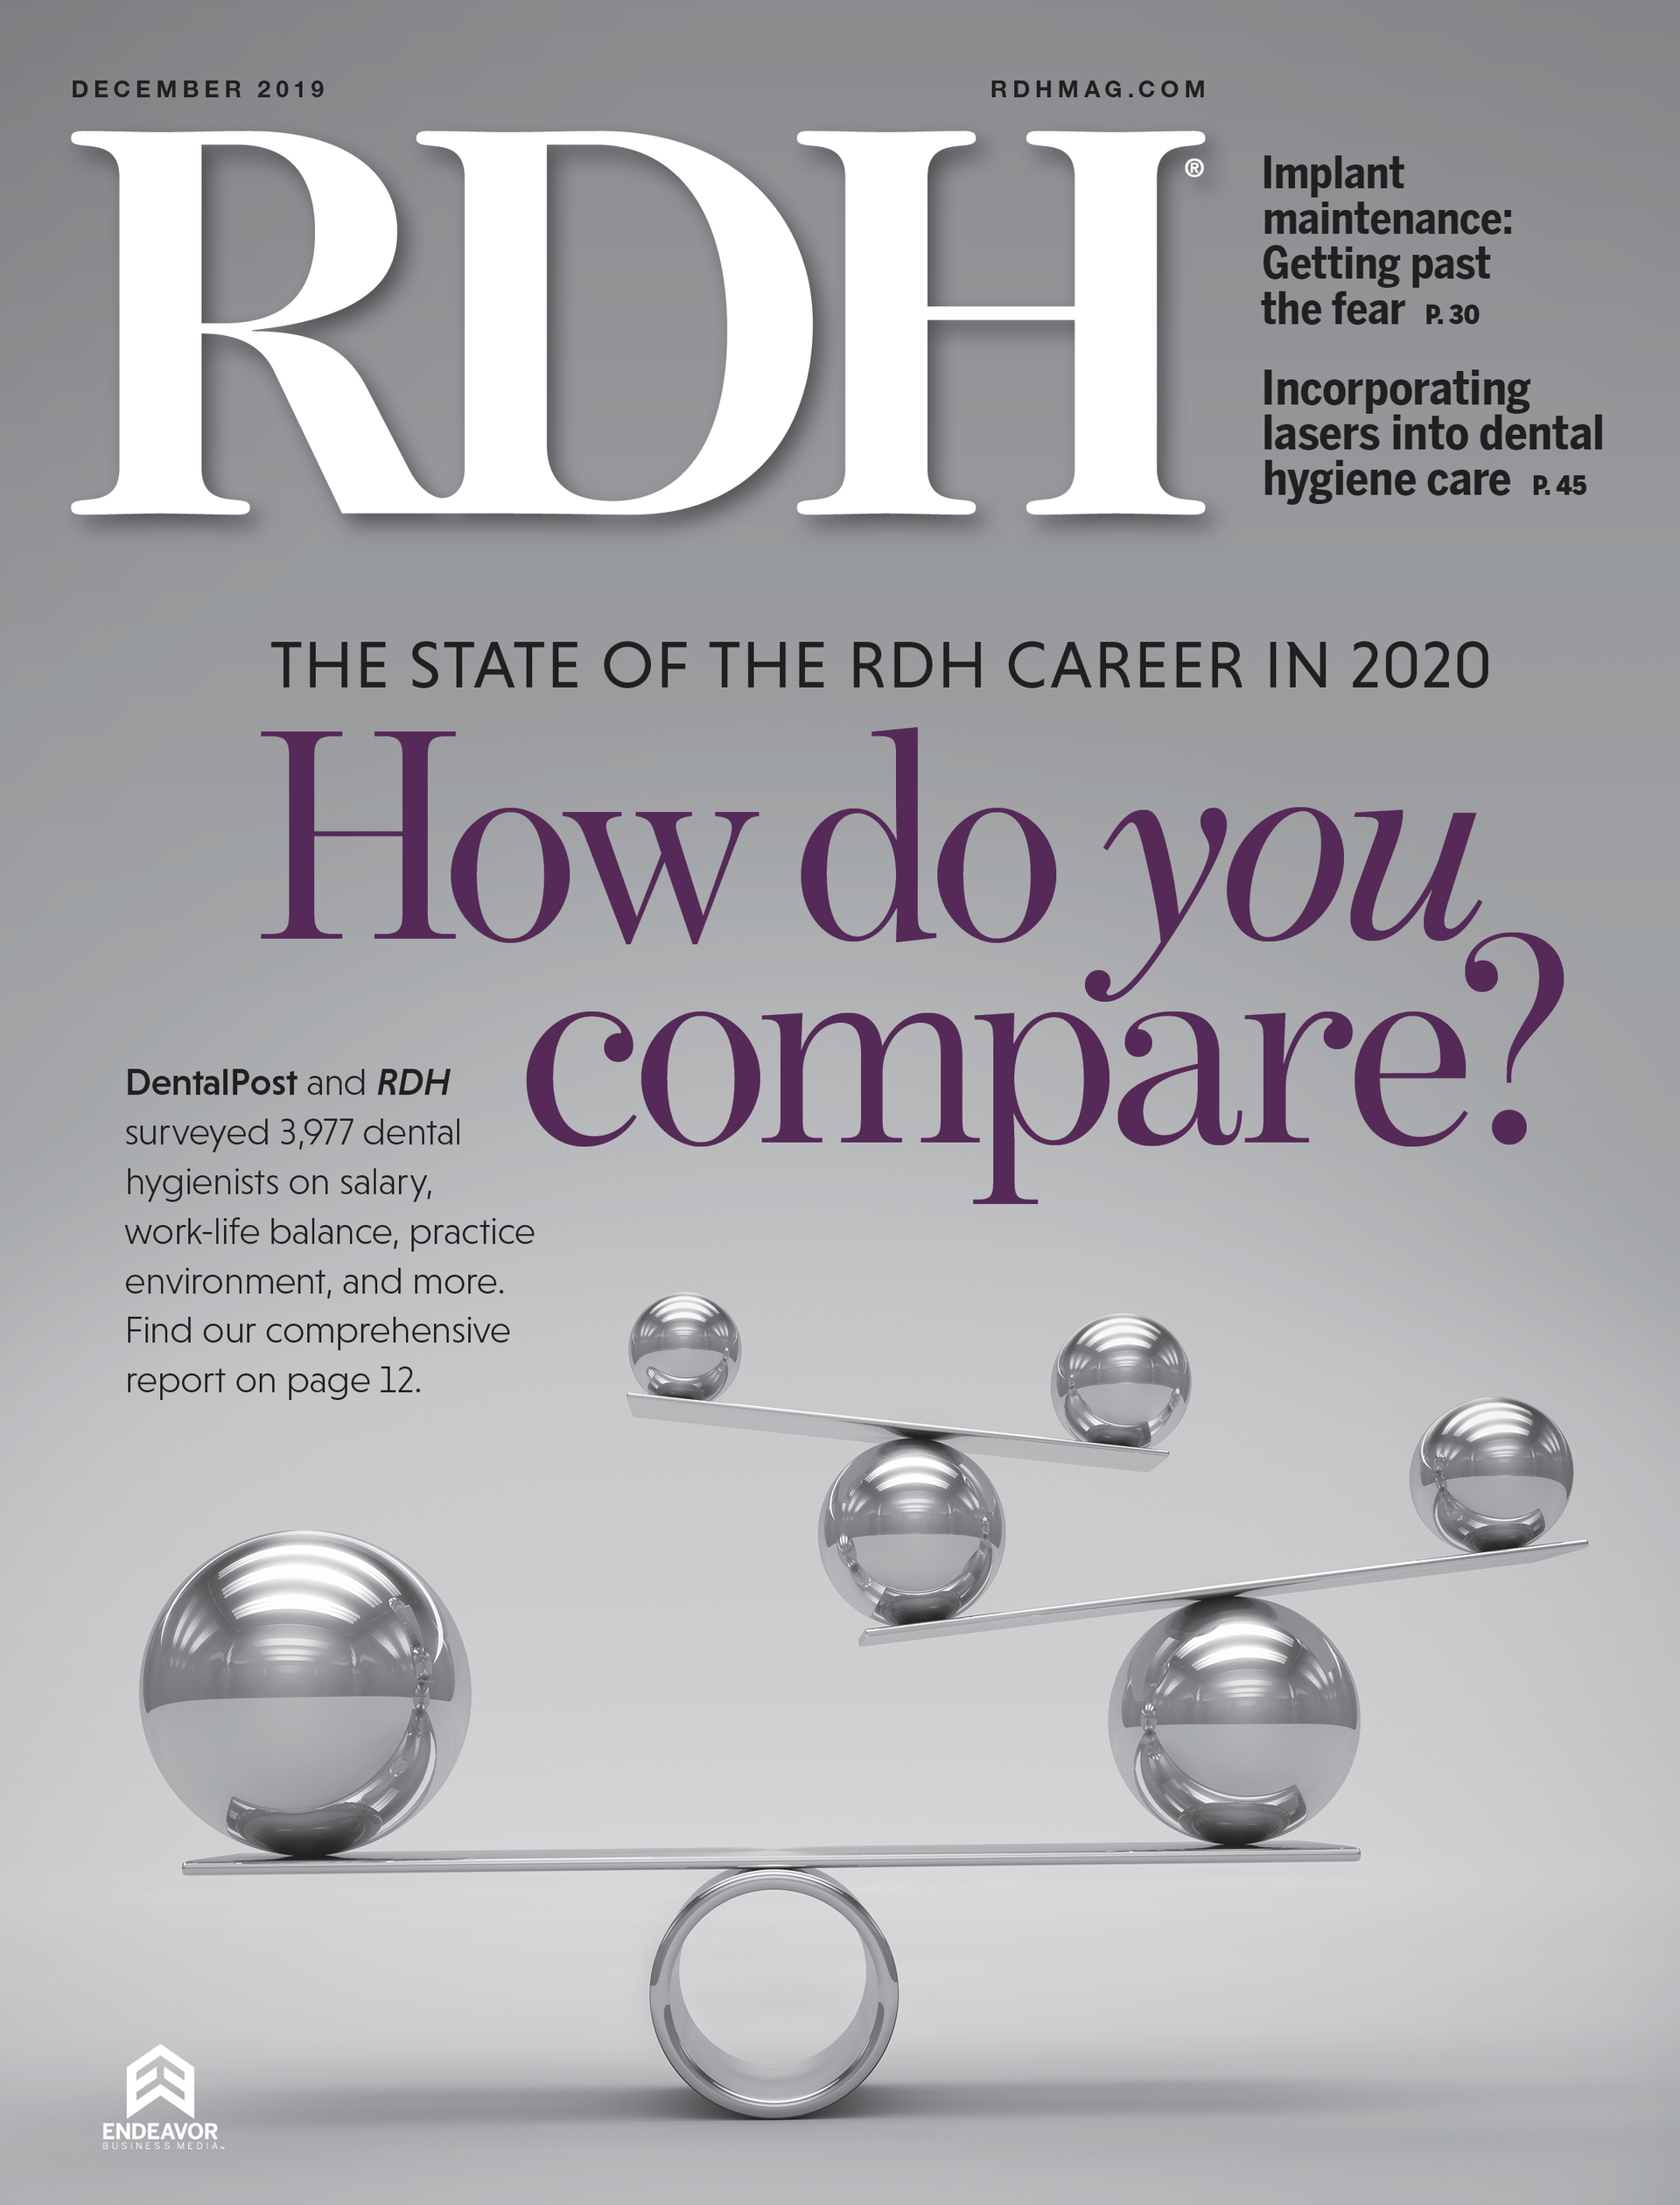 Surveying over 8,800 dental professionals, RDH Magazine and DentalPost have partnered to conduct the largest and most comprehensive dental professional survey of its kind.